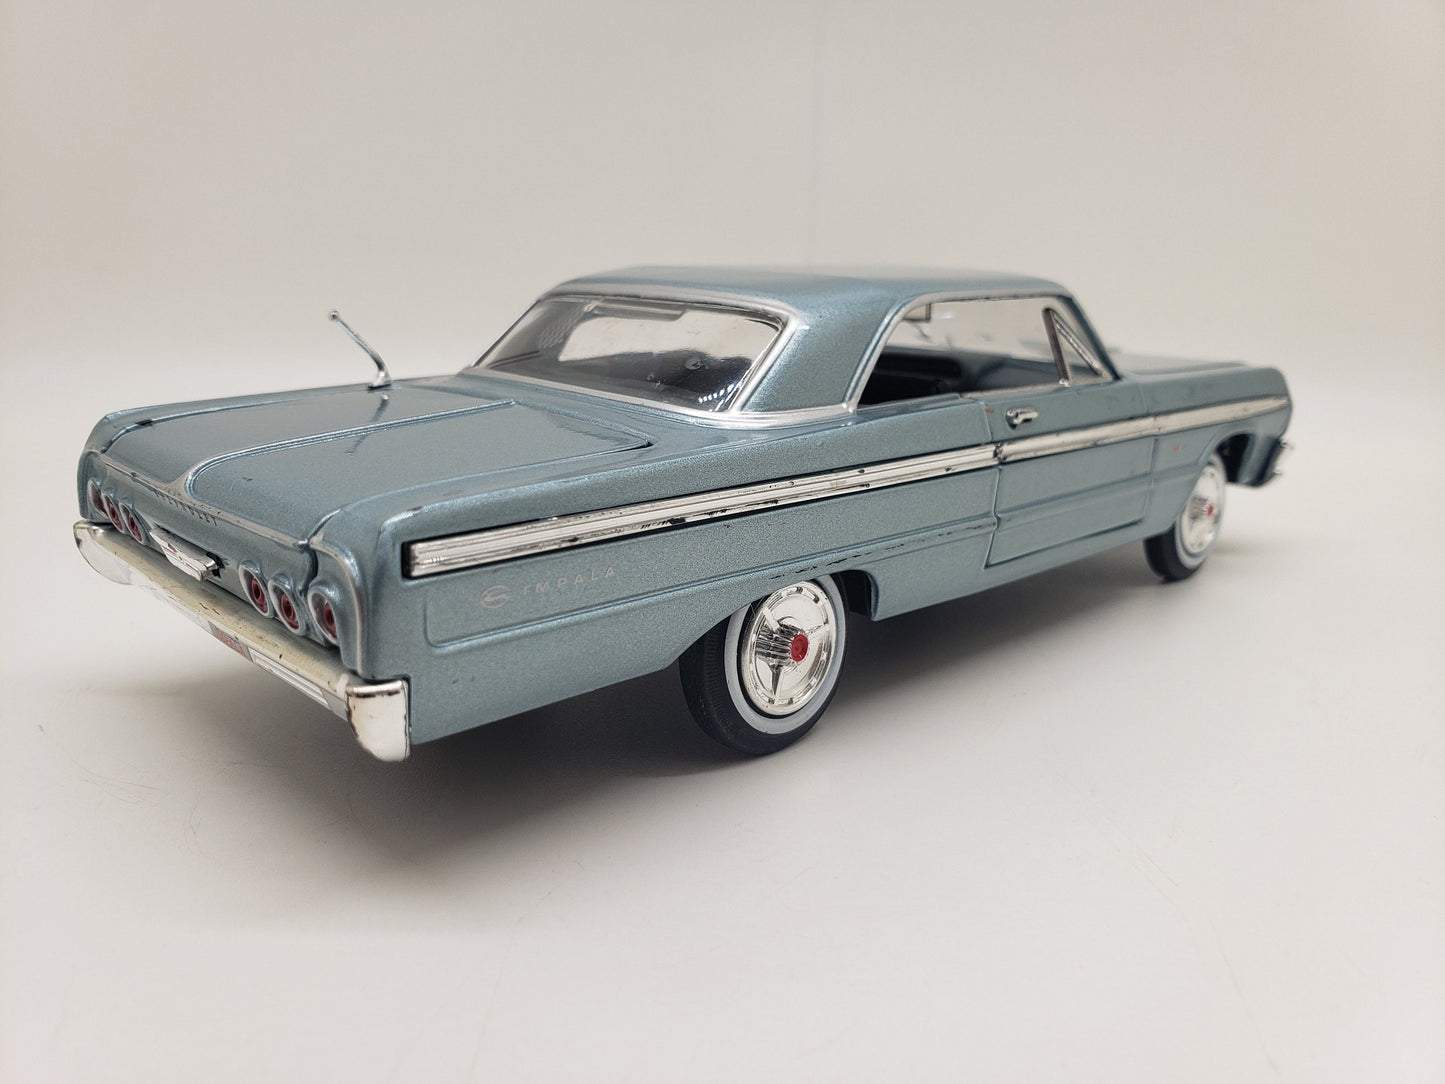 1964 Chevrolet Impala Light Blue Vintage Collectible Replica Scale Model Metal Car Perfect Birthday Gift